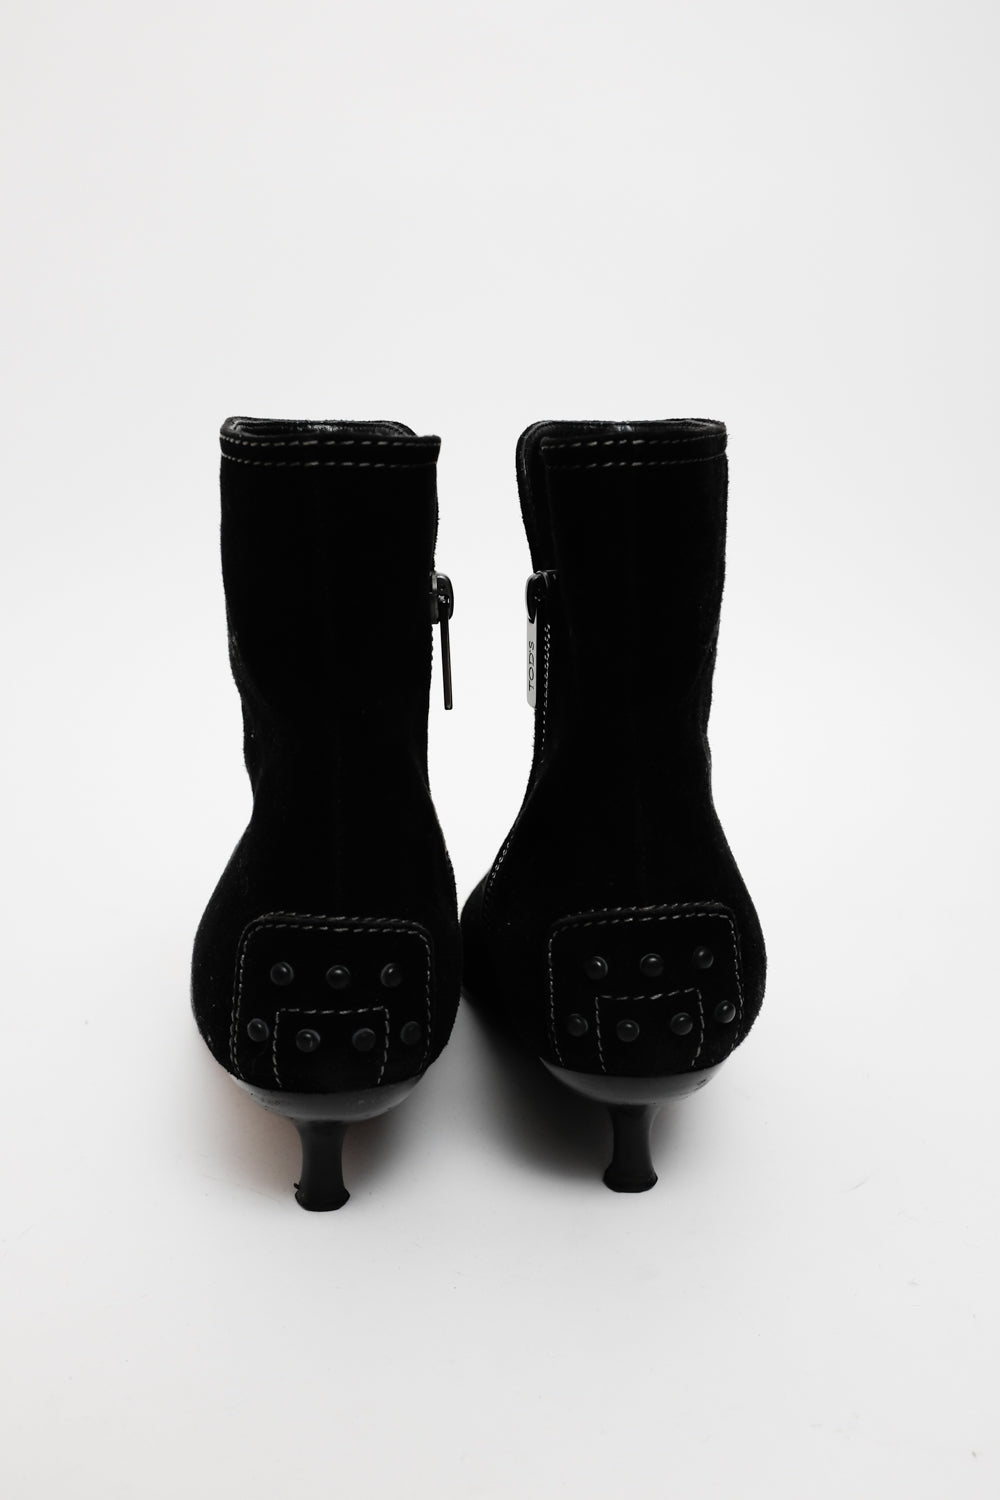 0065_TODS 39 BLACK SUEDE LEATHER ANKLE BOOTS